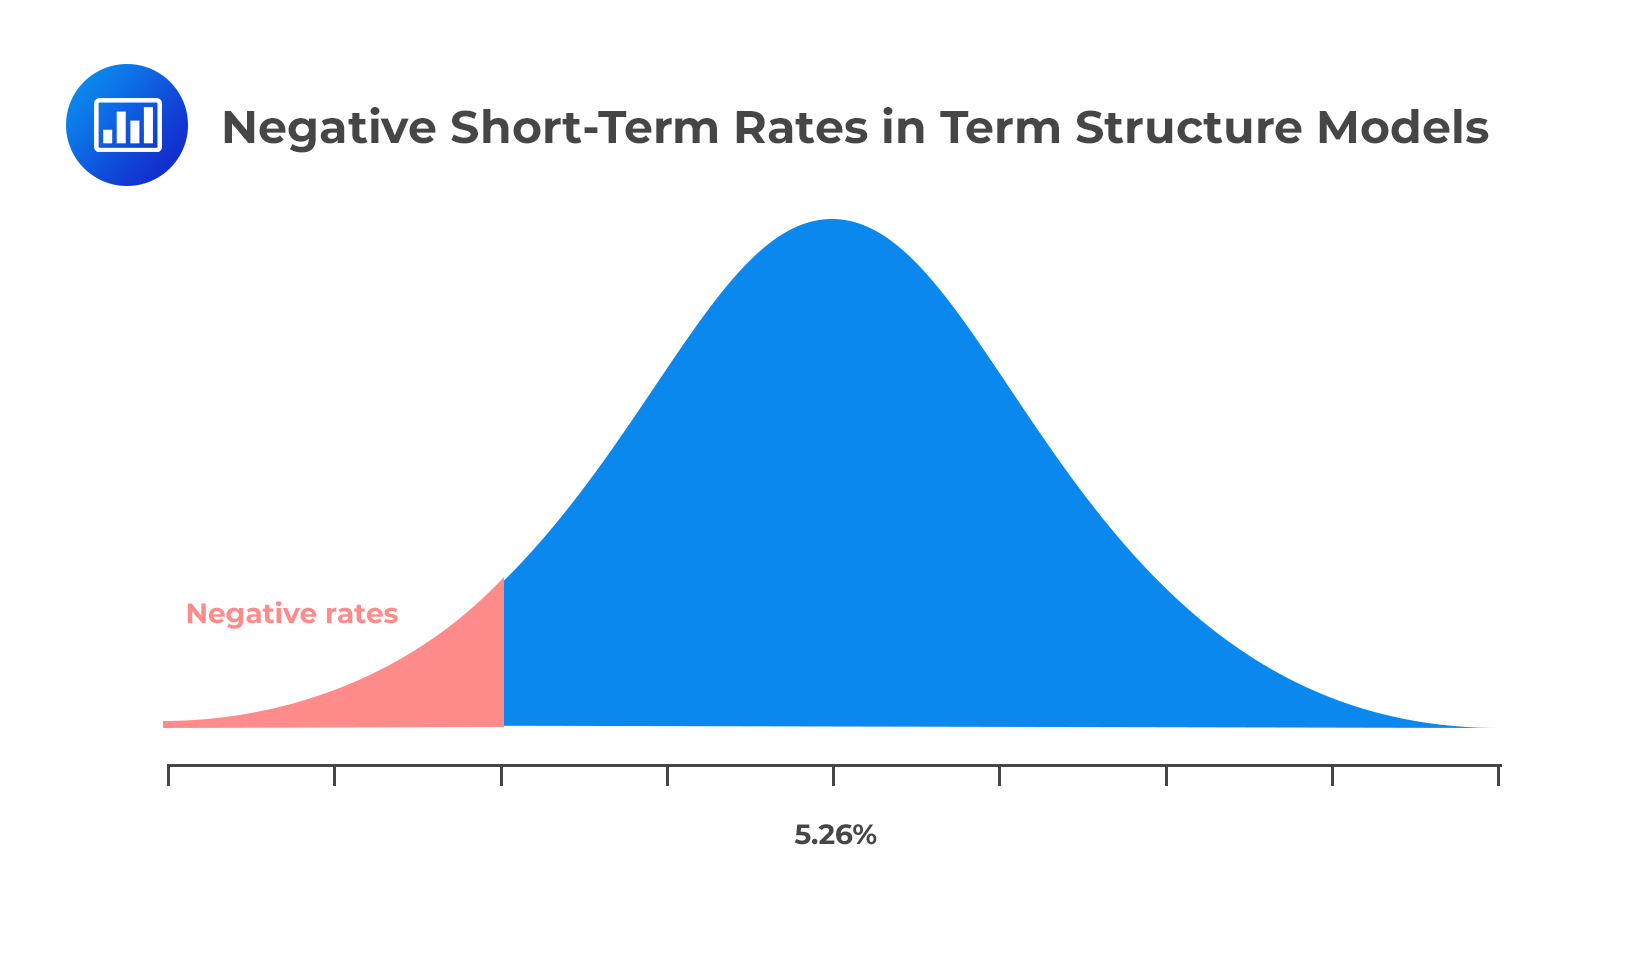 Negative Short-Term Rates in Term Structure Models